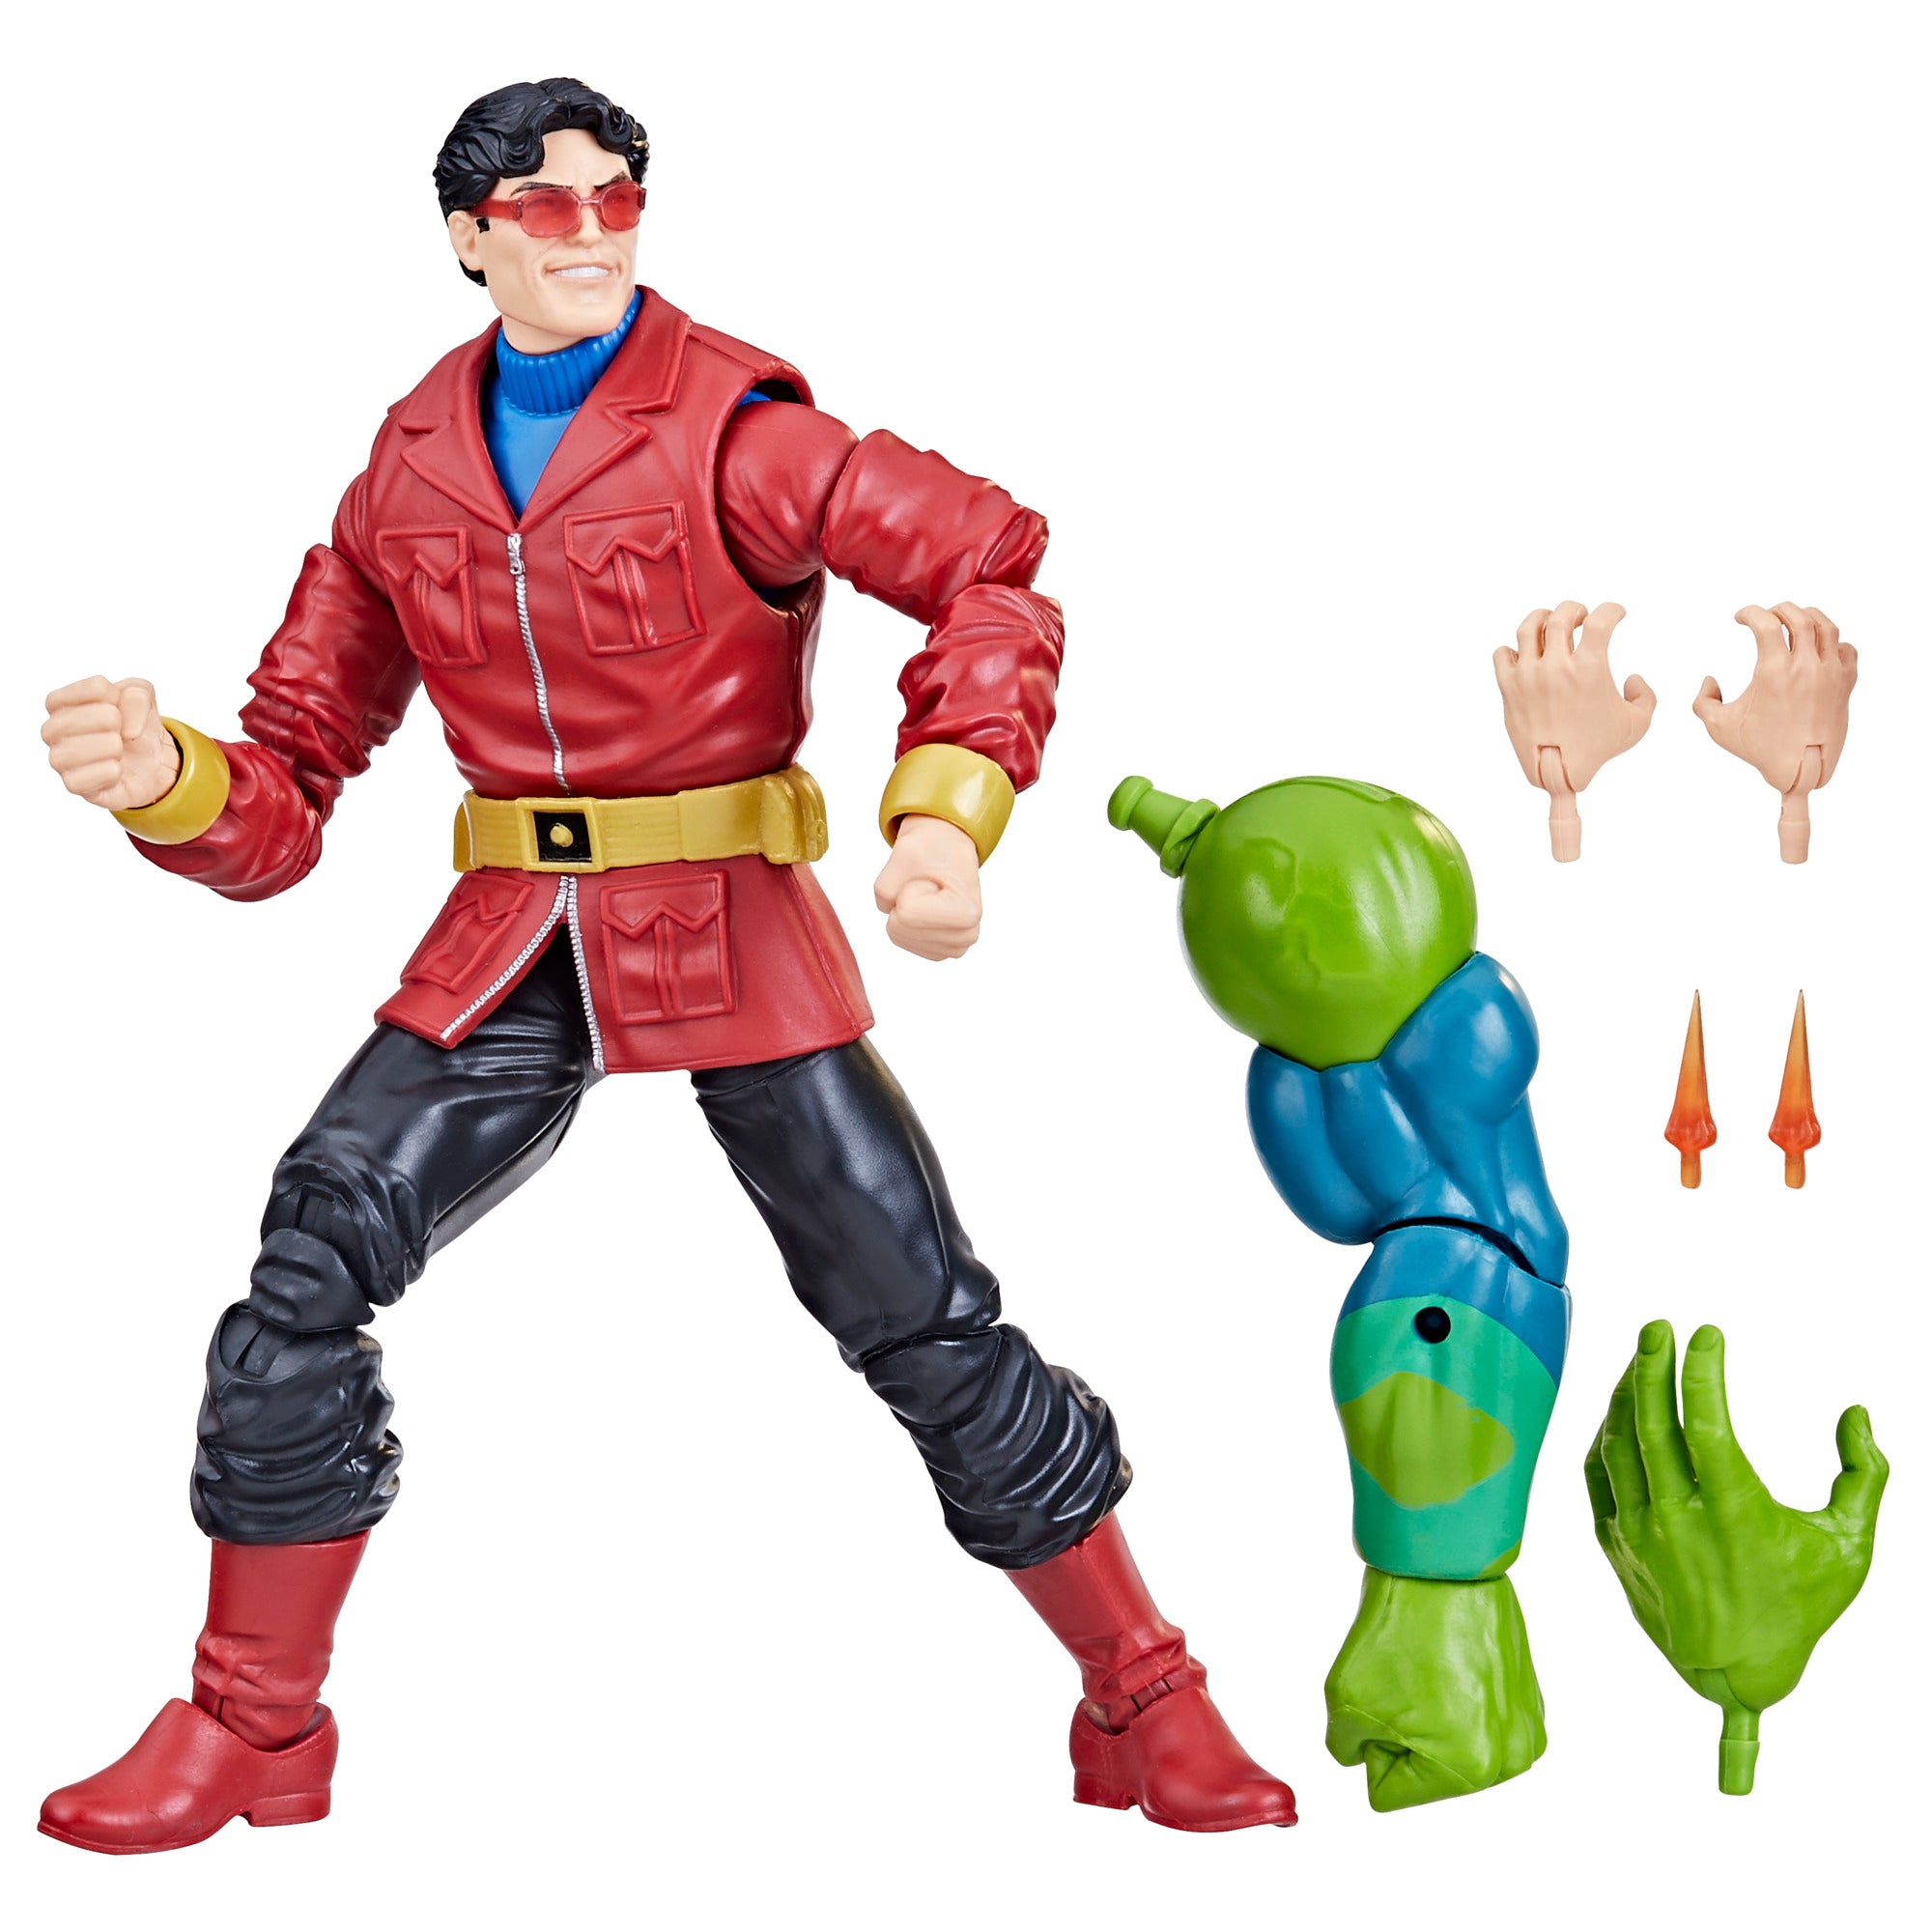 Man of Action Figures - Toy Store Guide